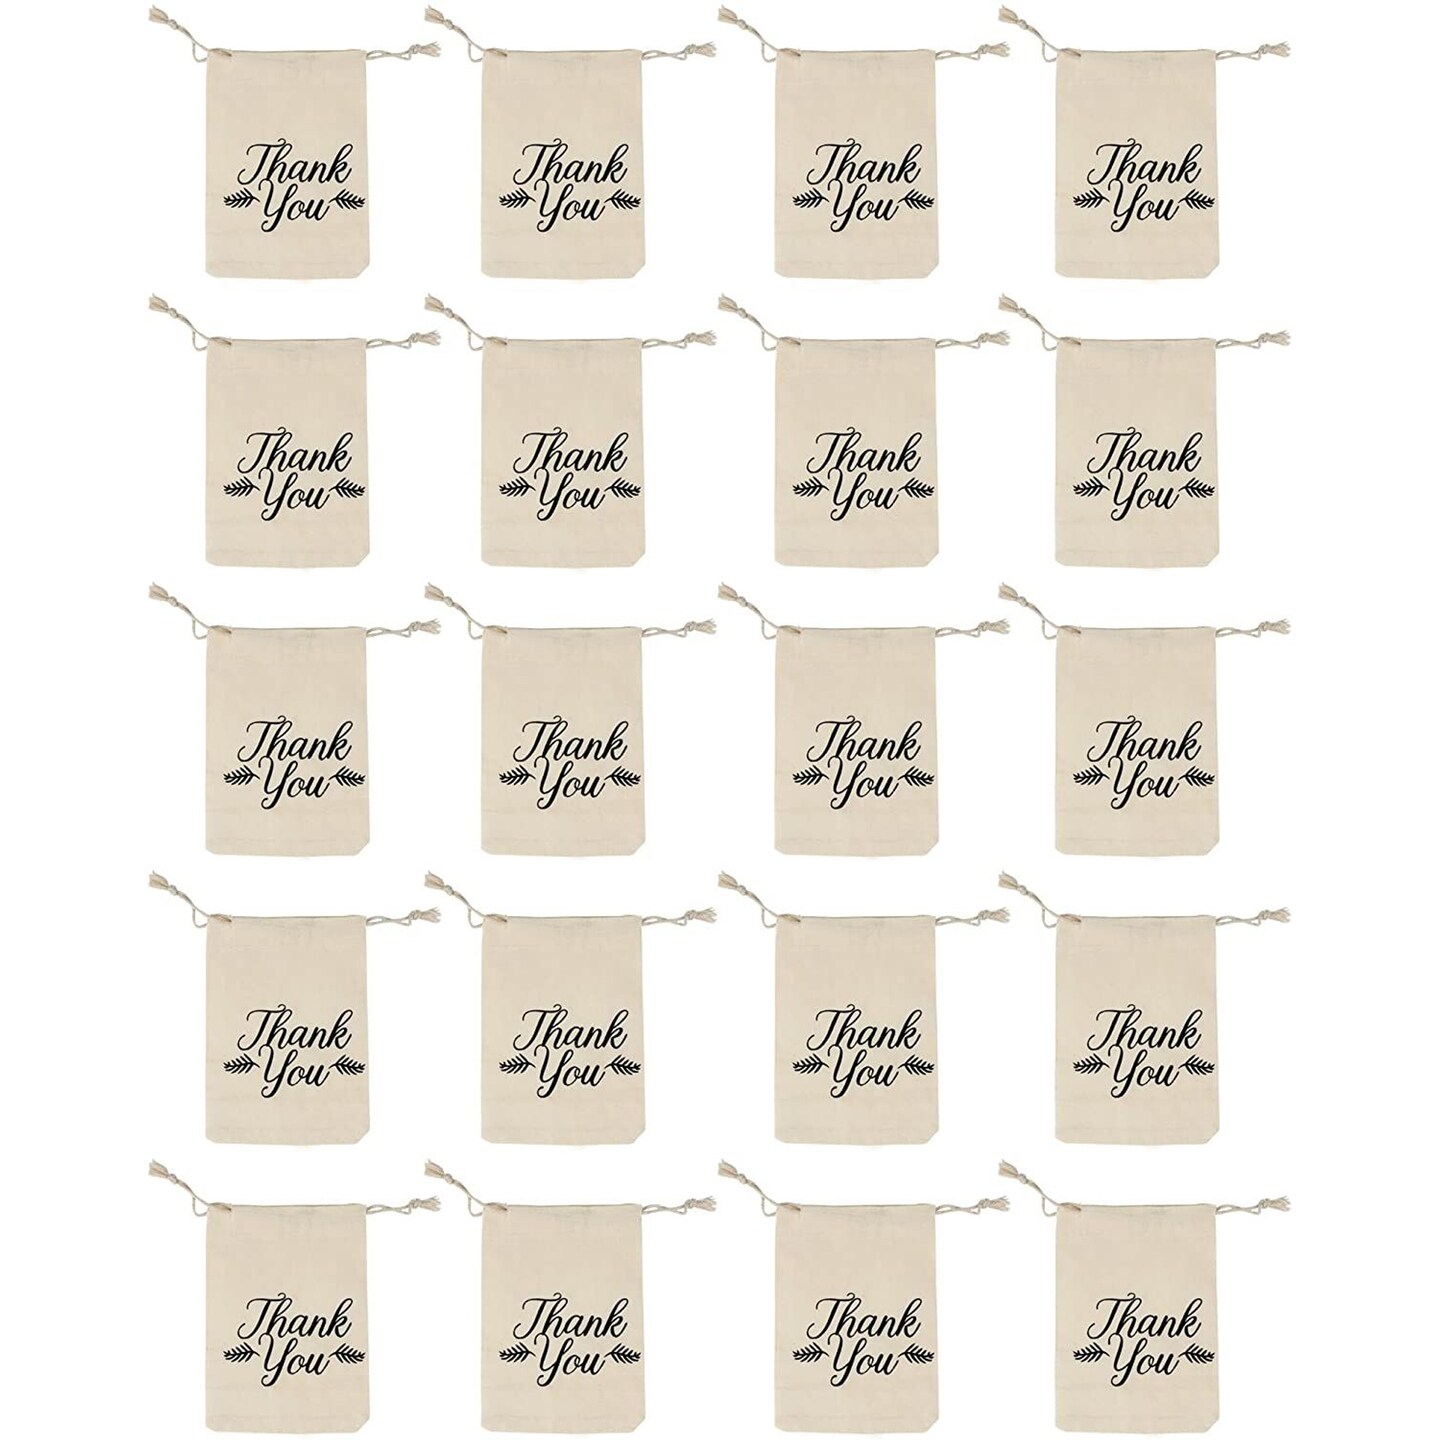 20-Pack Thank You Jewelry Pouch Bag for Wedding Birthday Party Favors Raffle Bags Goodie Bags Party Supplies 4.1 x 5.7 Inches